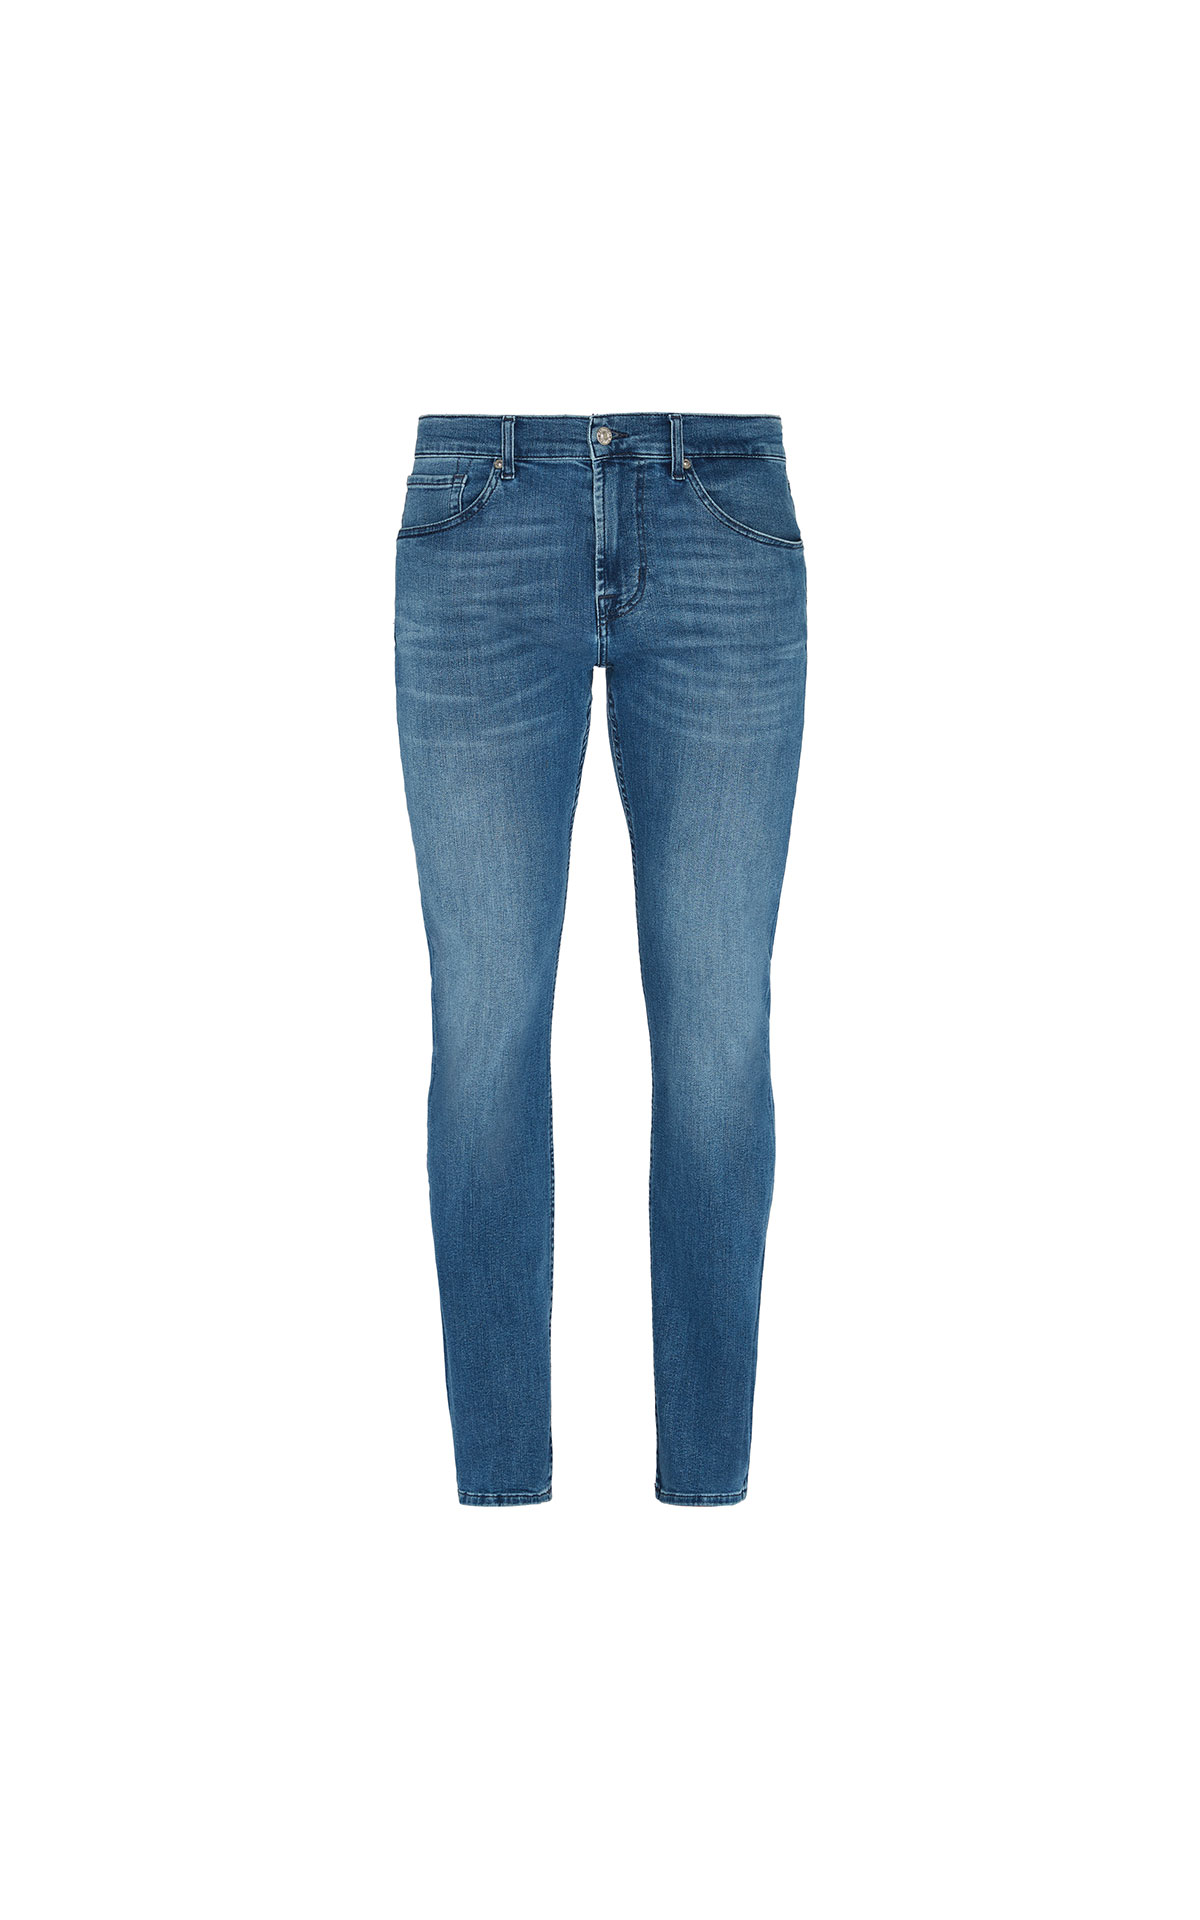 7 For all Mankind Slimmy jean from Bicester Village